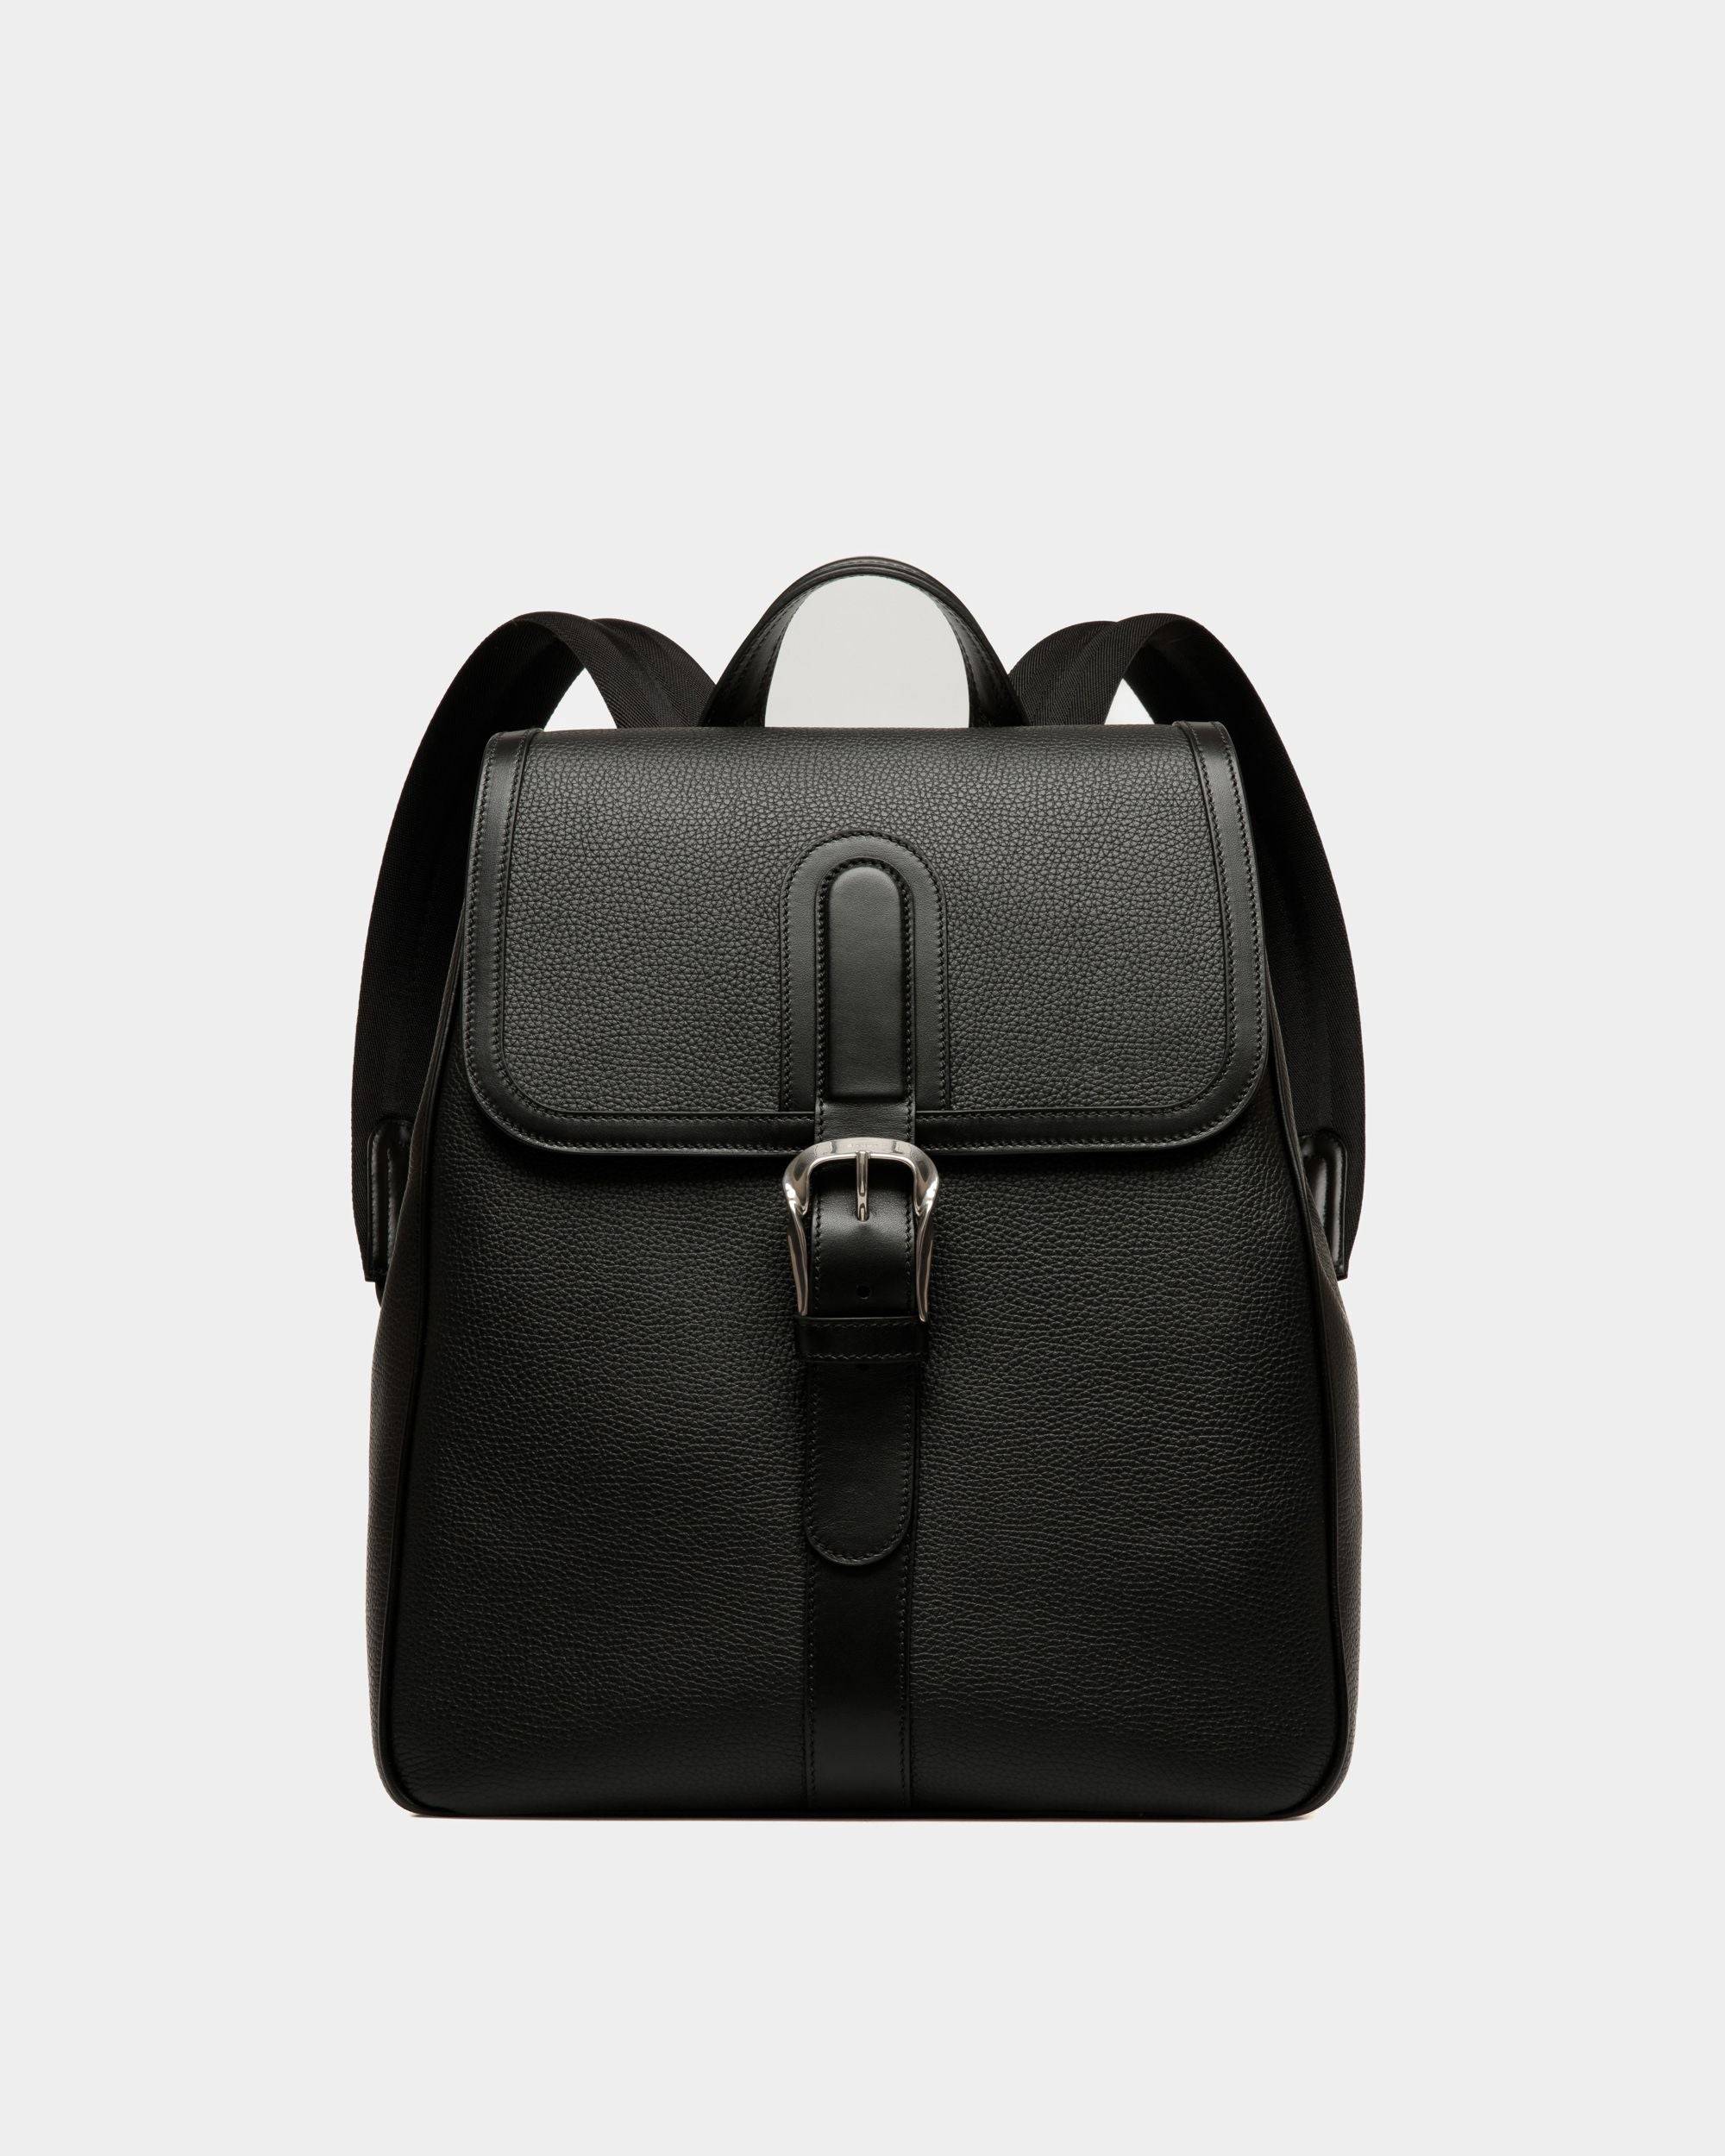 Men's Spin Backpack In Black Grained Leather | Bally | Still Life Front